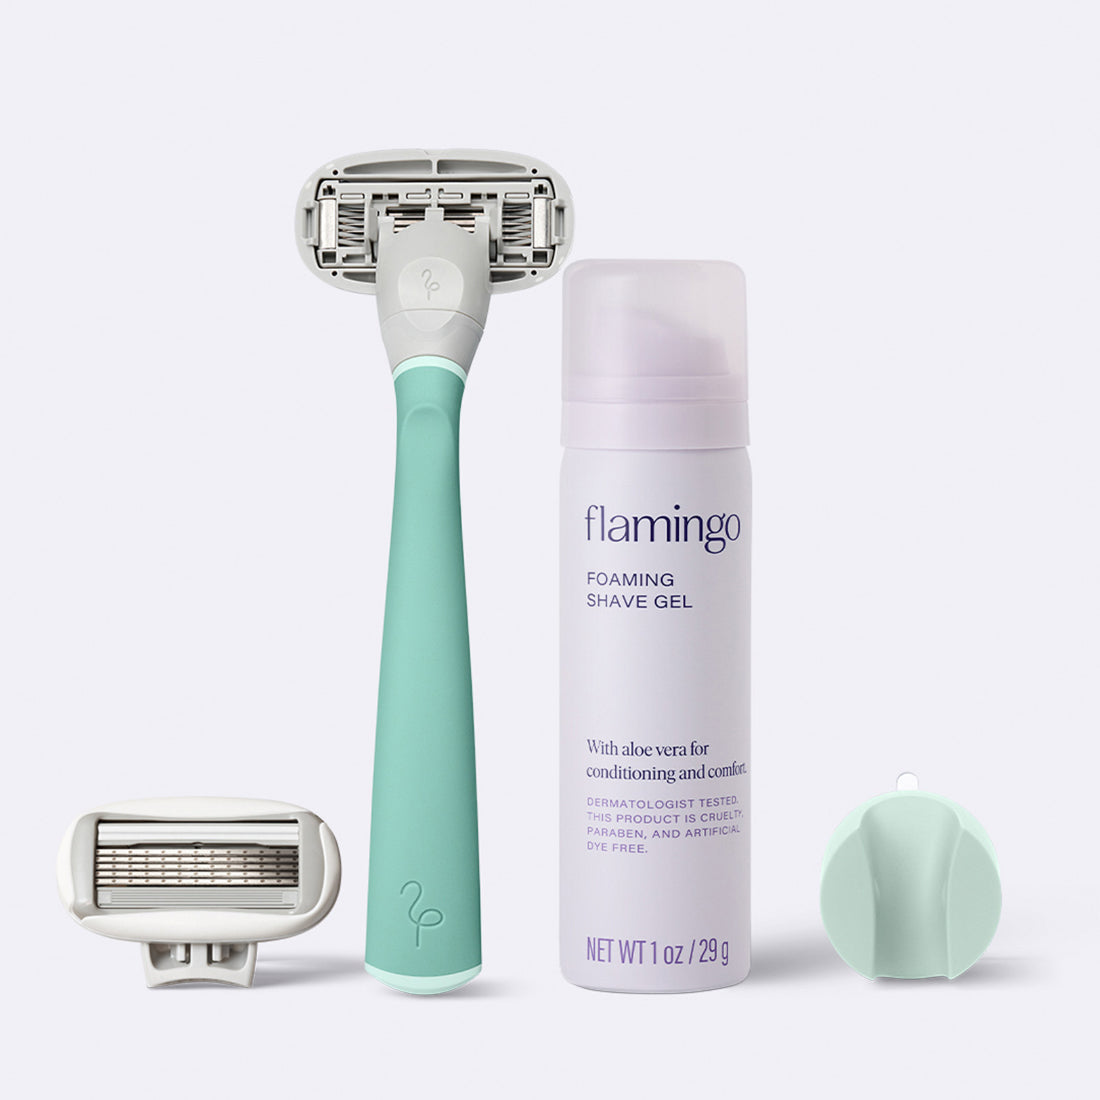 Flamingo Starter Set in the color Sage, featuring a razor, shower holder, extra blade, and mini 1oz foaming shave gel